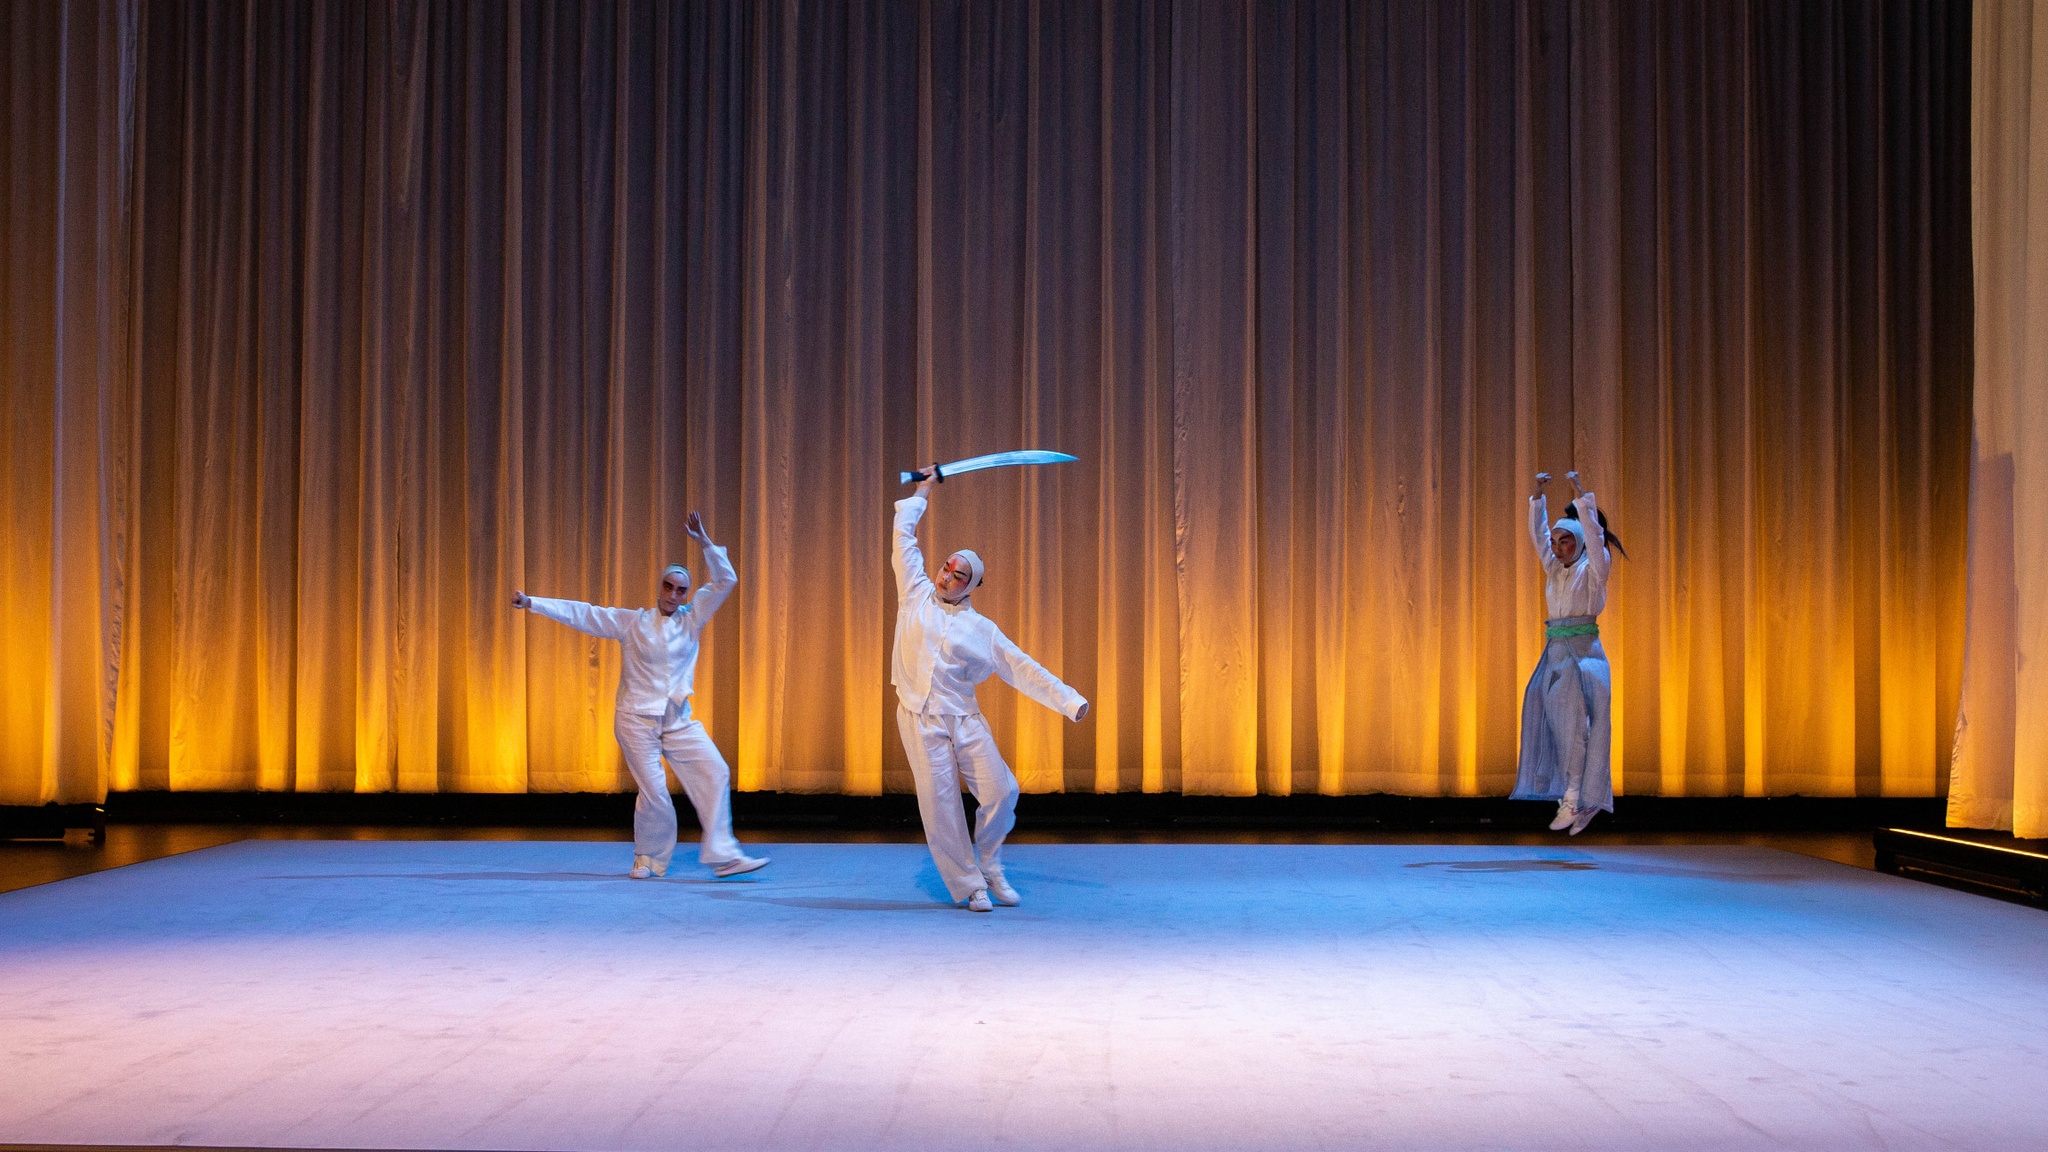 Three dancers in costumes inspired by Peking Opera appear on stage with a curtain lit with a golden light behind them. One stands with one leg outstretched, with one arm held parallel to the floor and one curved above her head. The Second dancer holds a sword above her head,, curving her body slightly. The third jumps straight up into the air with arms above her head.